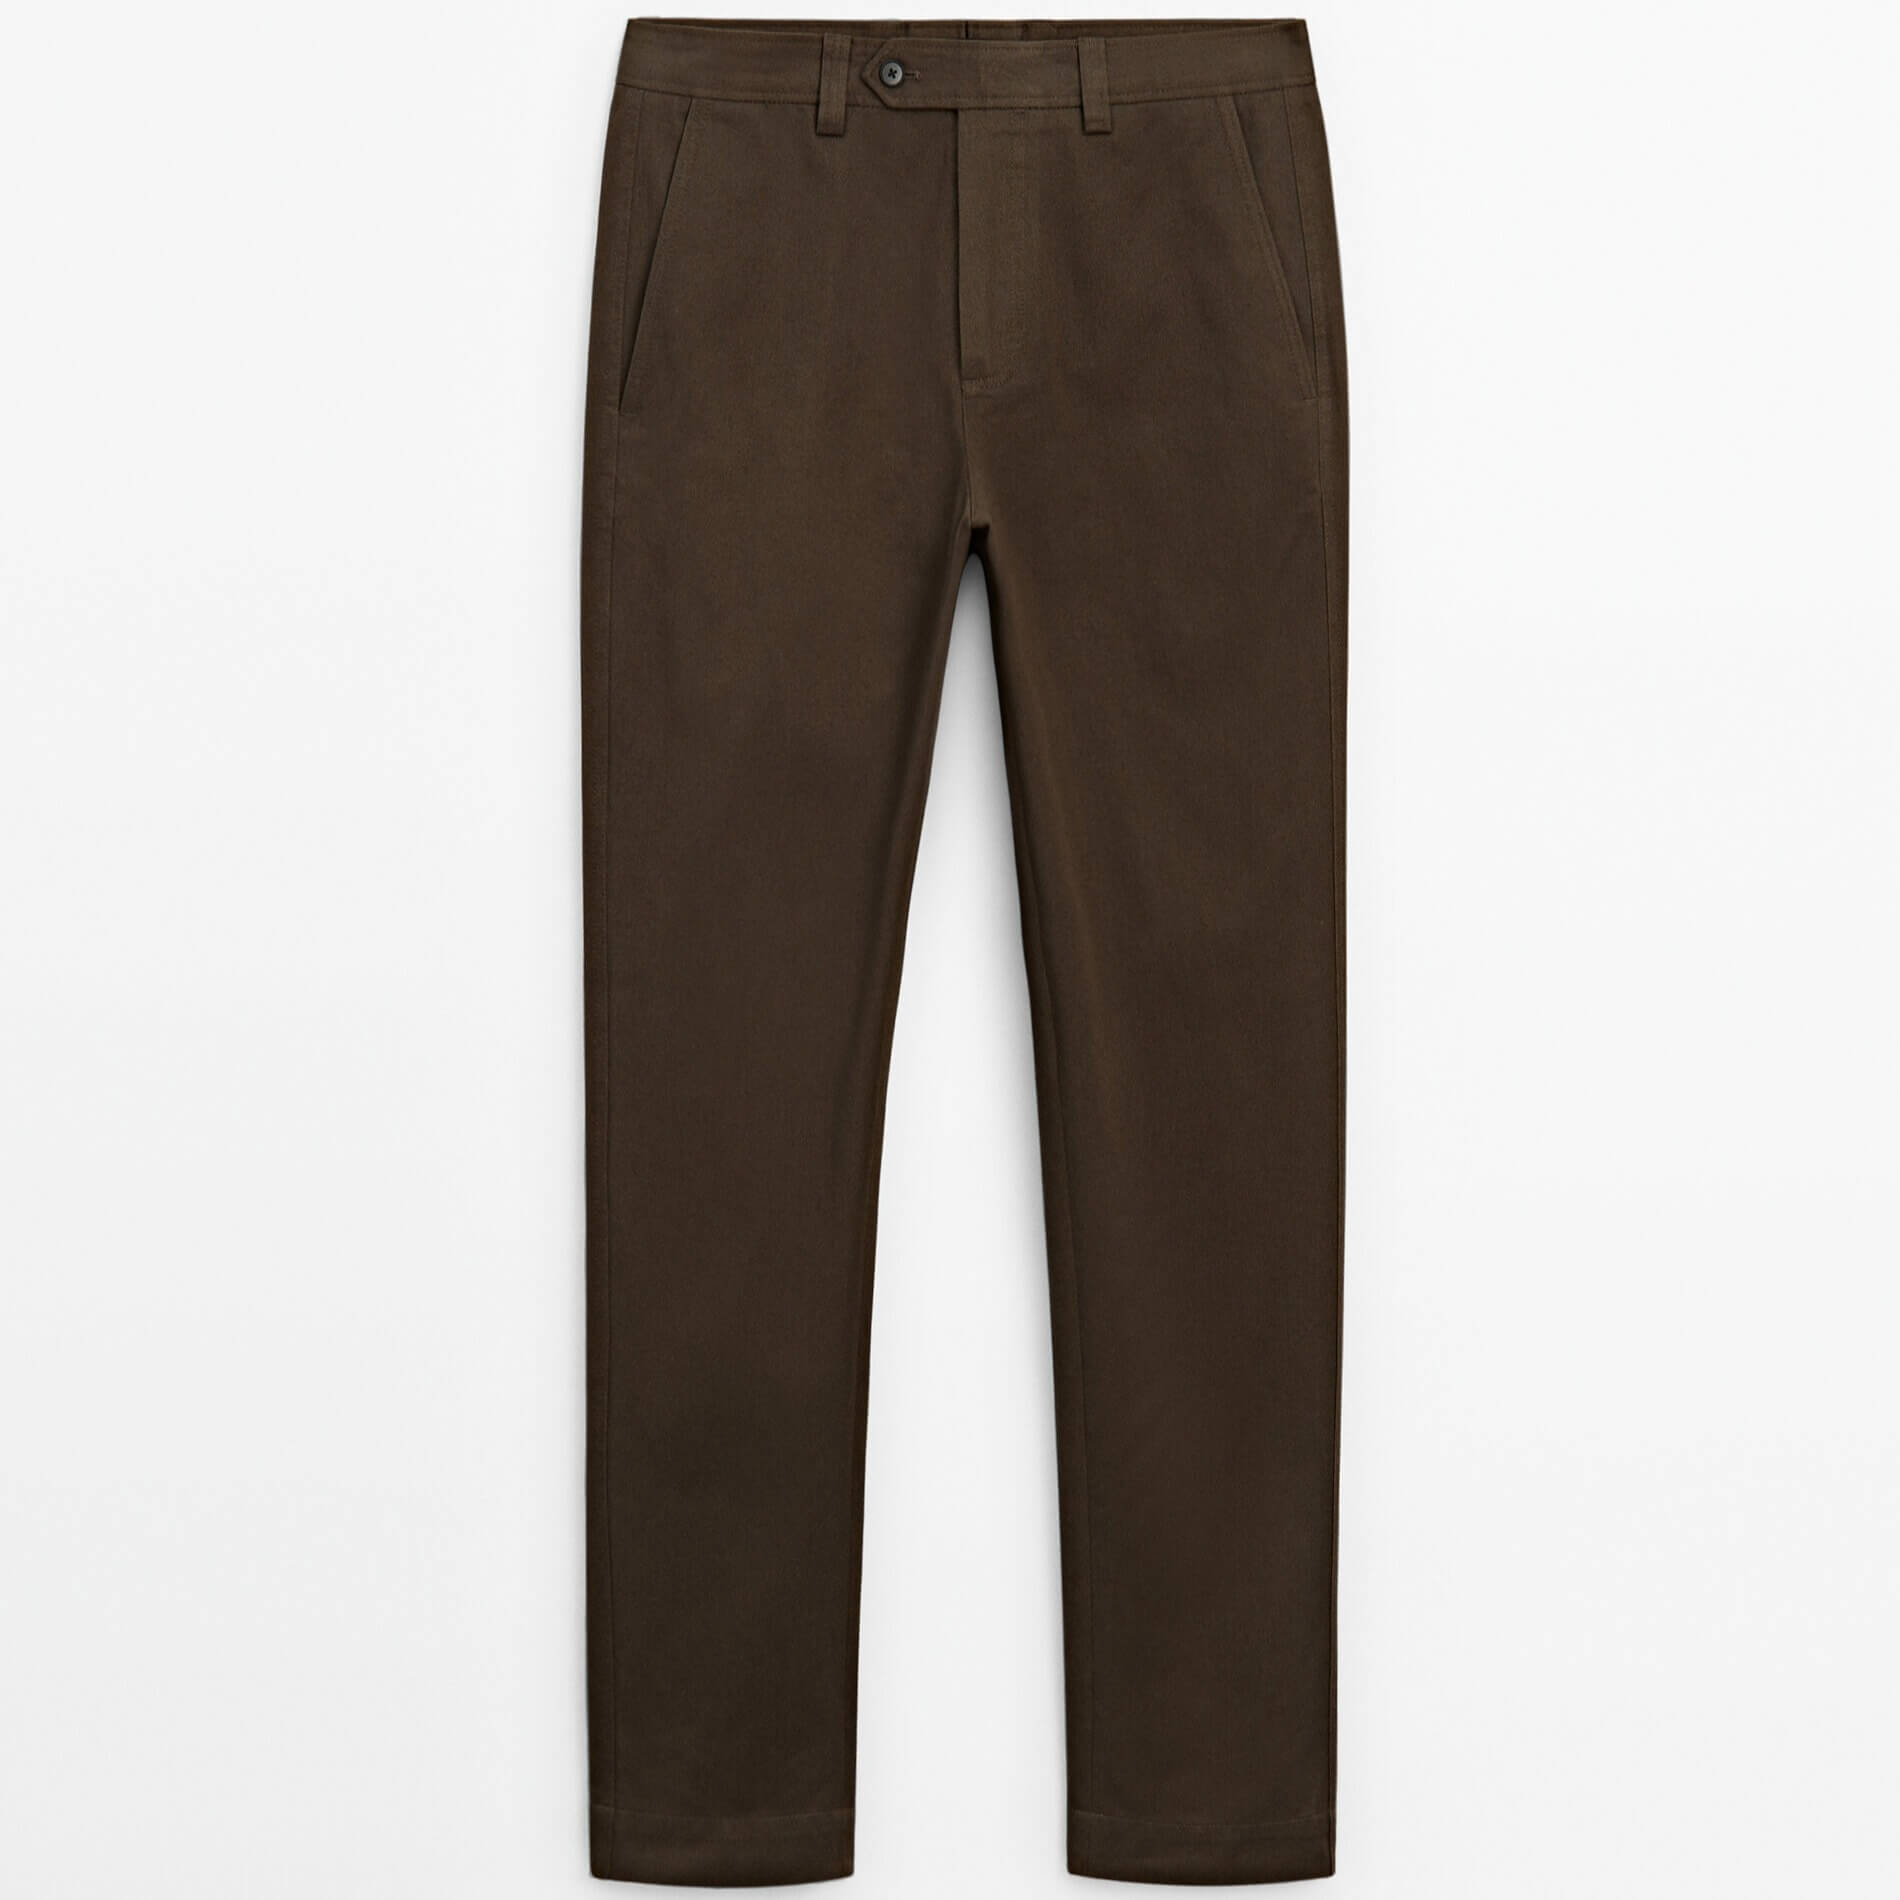 цена Брюки Massimo Dutti Relaxed Fit Belted Chino, коричневый